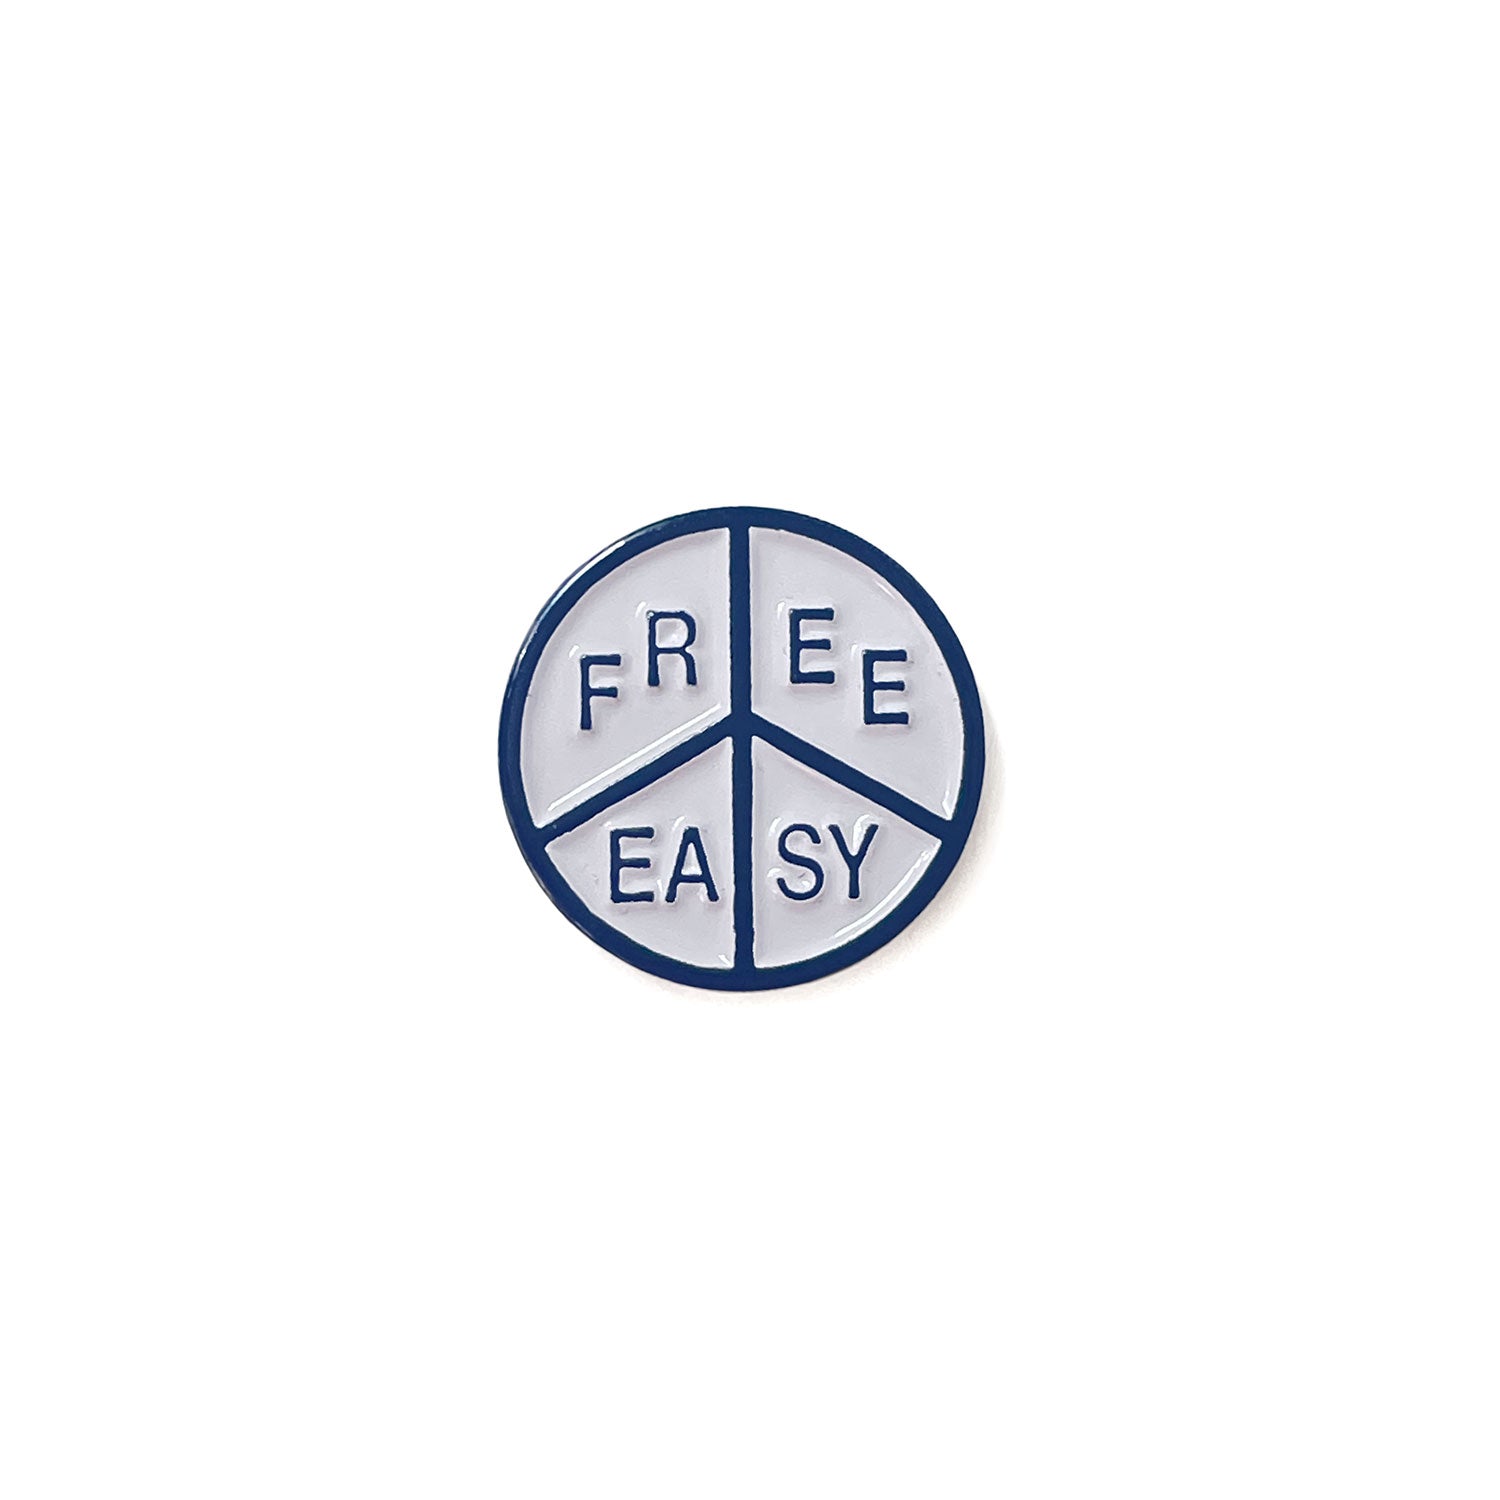 Free & Easy Peace Enamel Pin in navy and white on a white background - Free & Easy